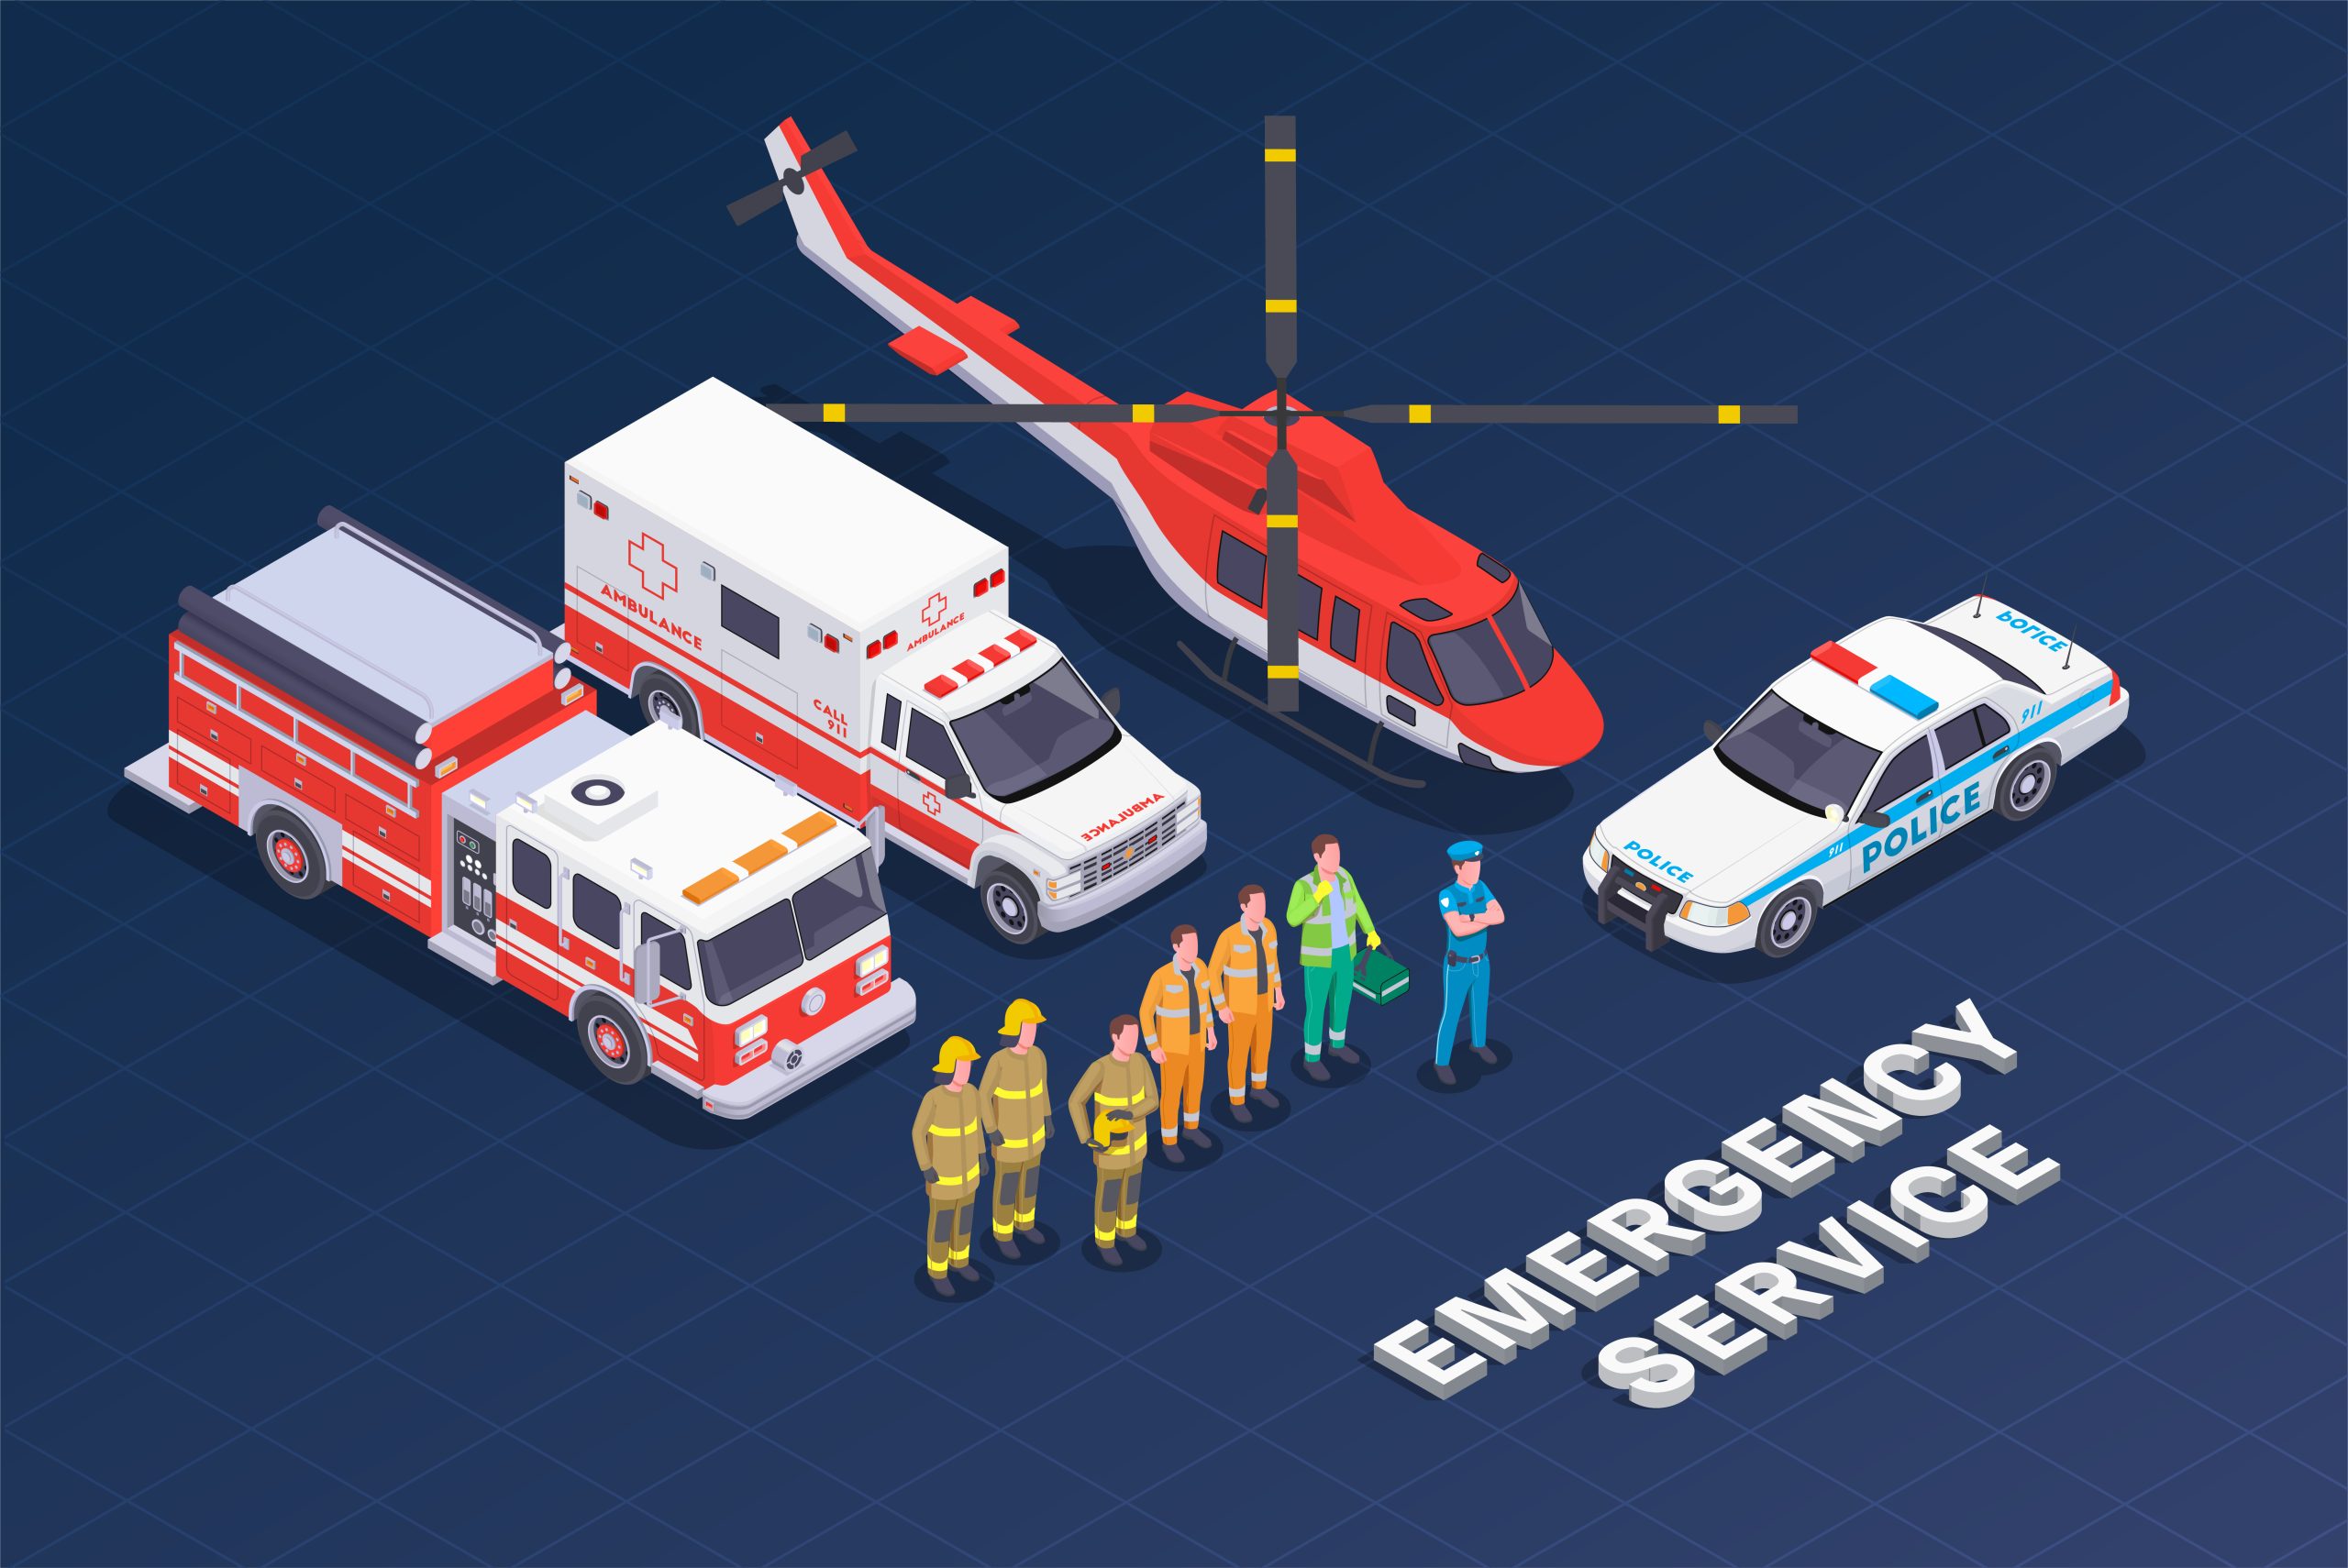 emergency medical services